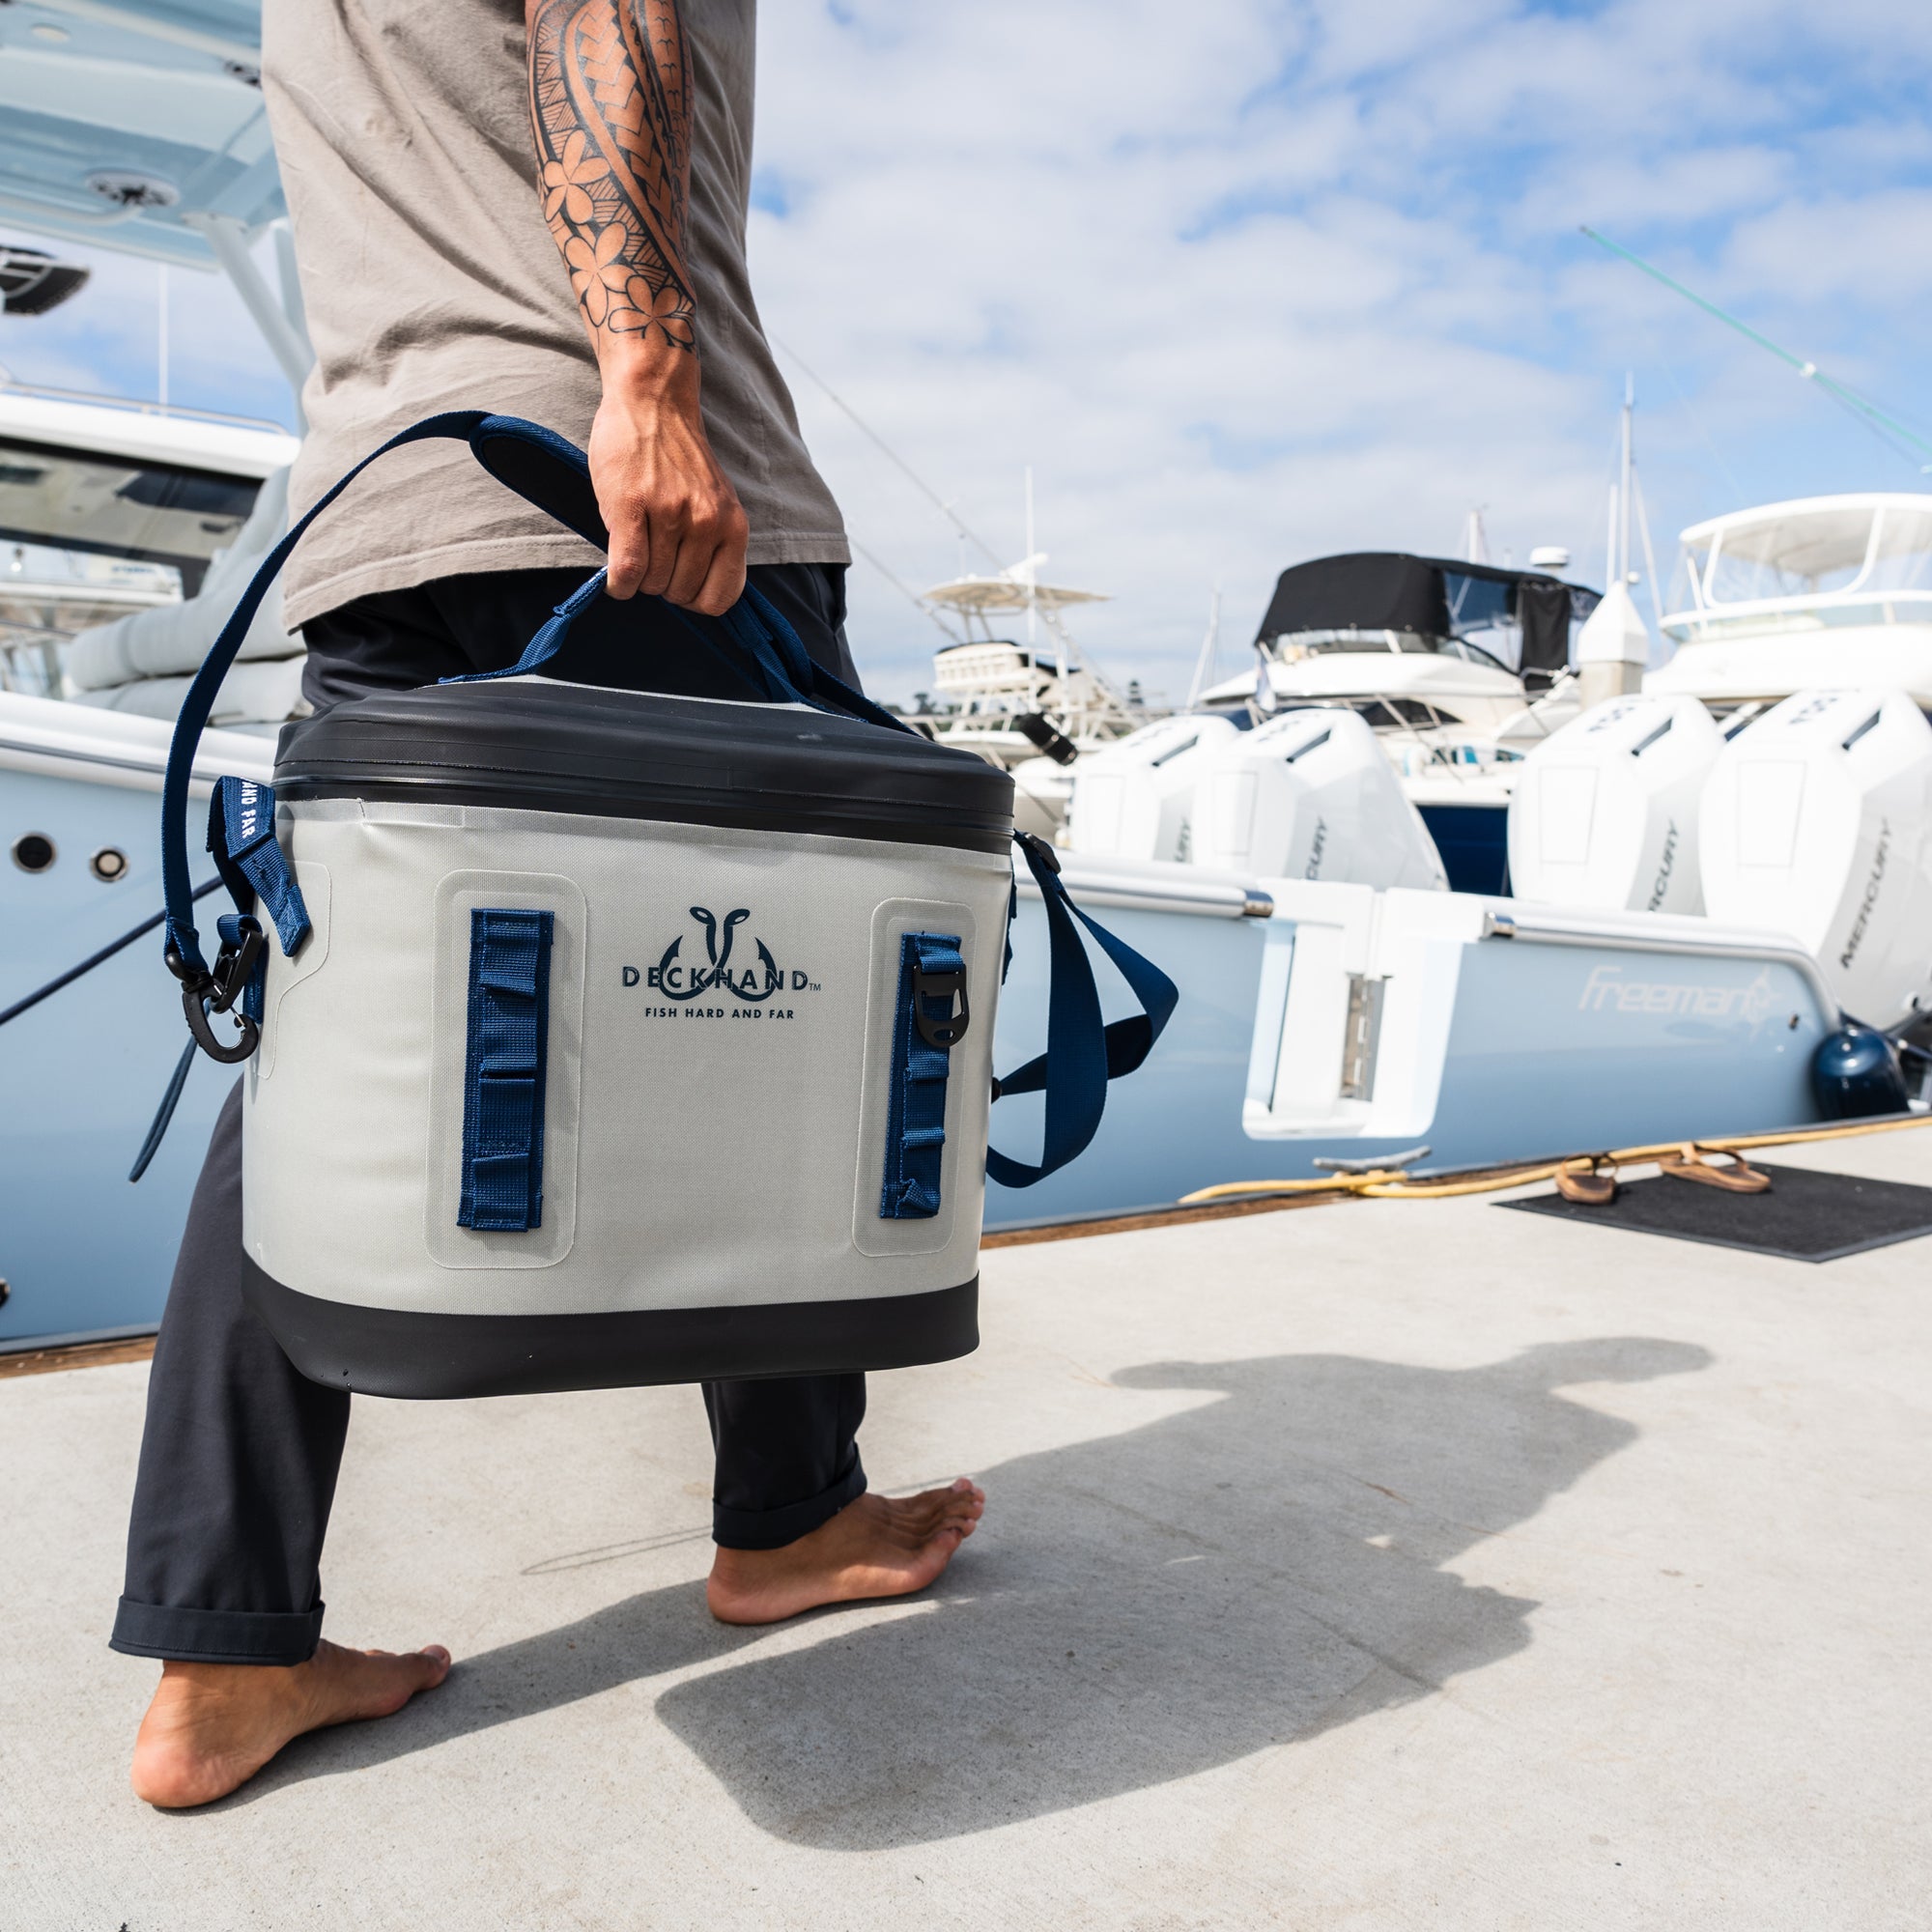 Deckhand Sports: Our Bags Don't Leak! Strongest Built Kill Bags & Dry